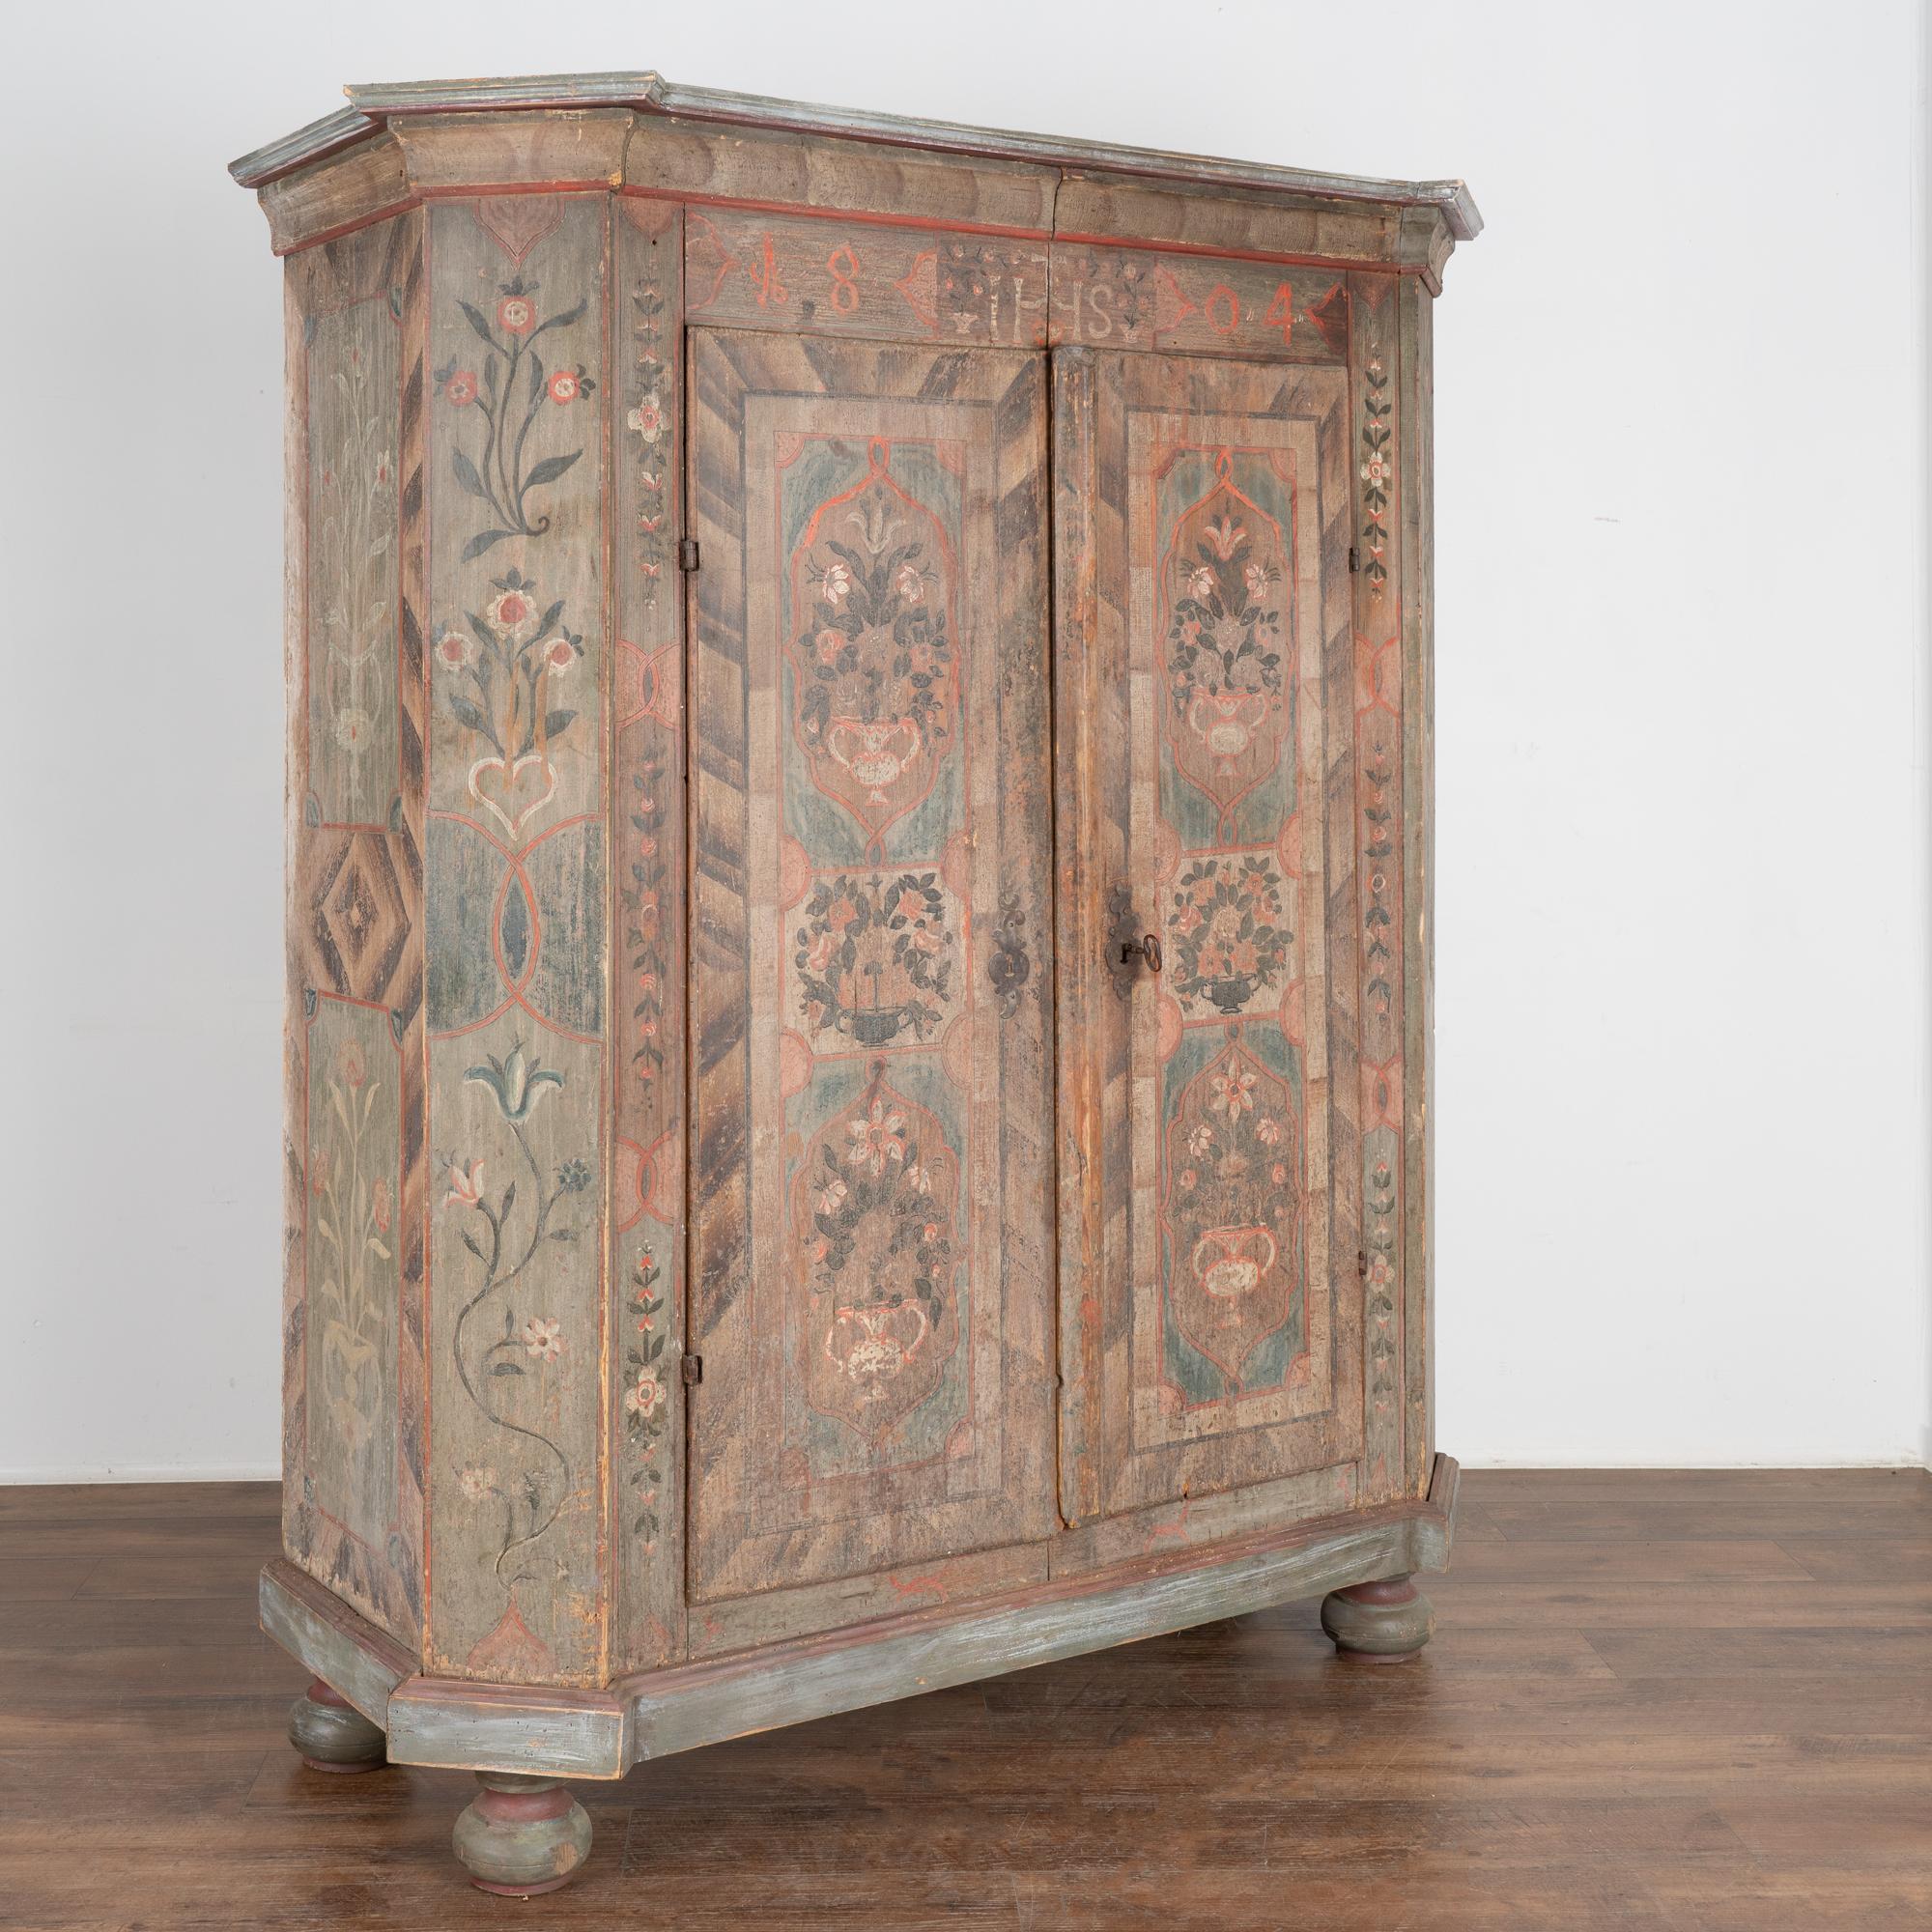 This lovely painted armoire still maintains the quality and details of the original hand-painted finish. The soft, gentle colors with delightful floral motifs are beautifully executed.
Notice the panels of flowers against the pale green and brown